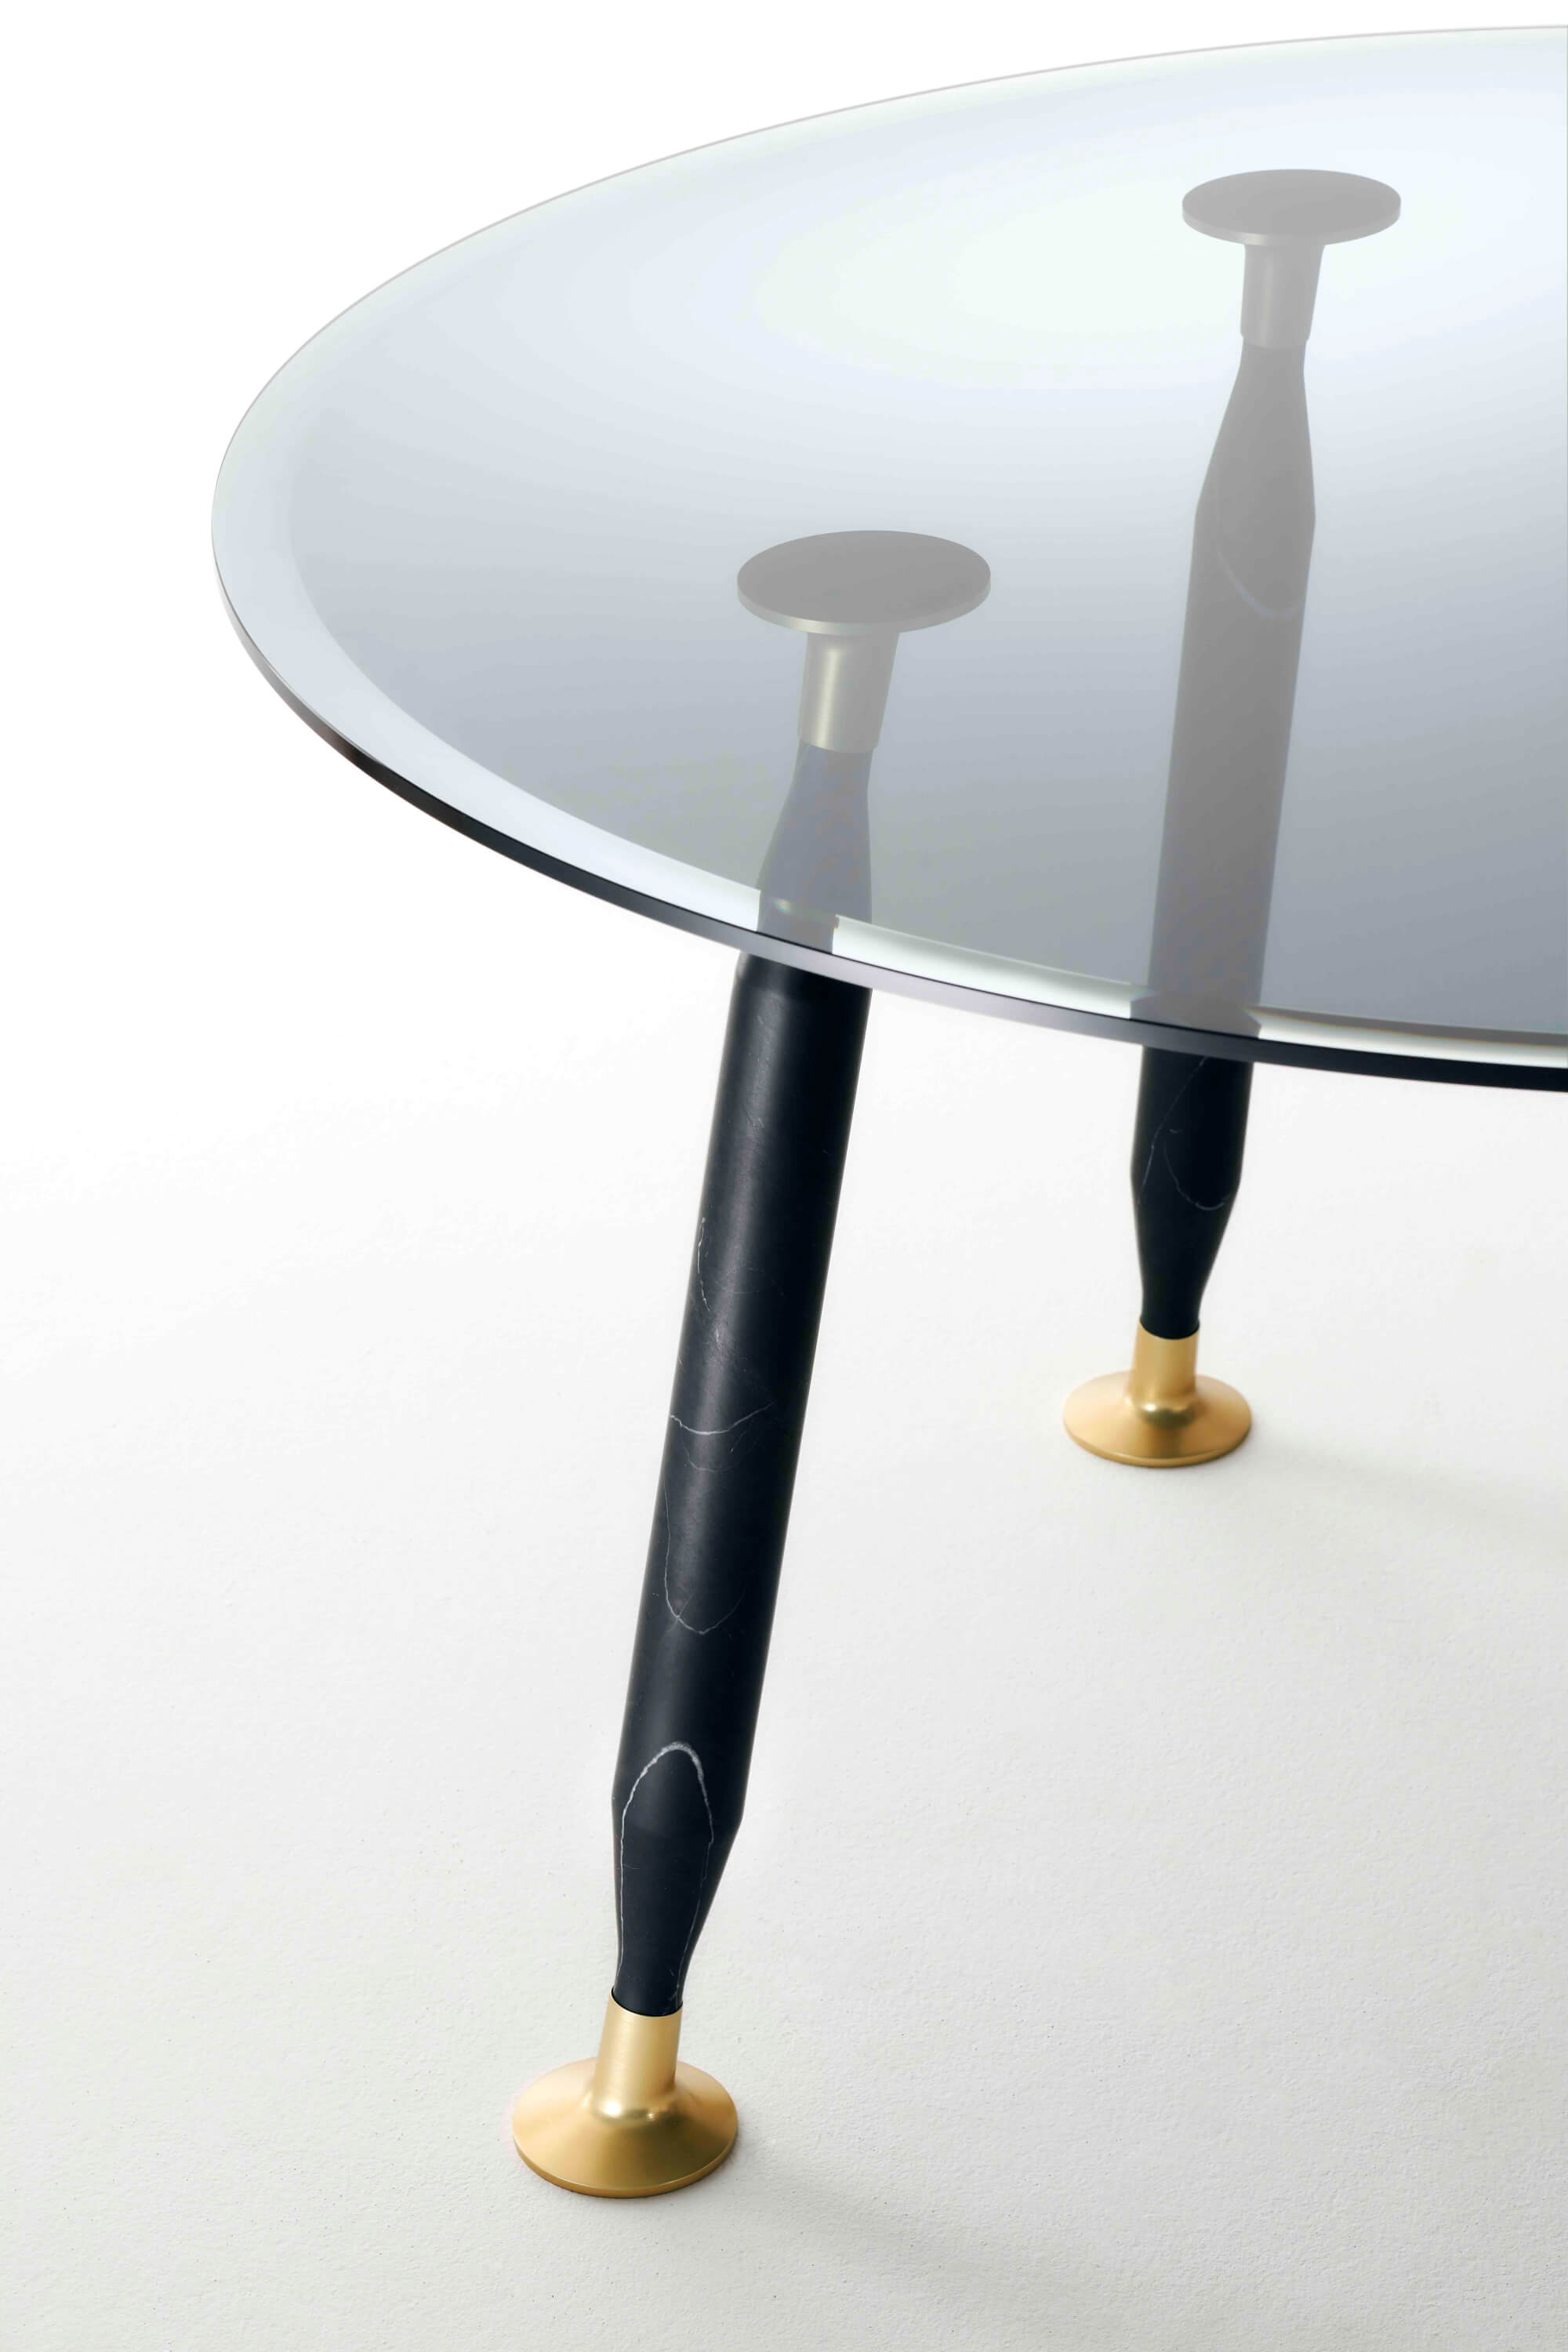 LADY HIO by Starck with S. Schito (GLAS ITALIA) - Tables